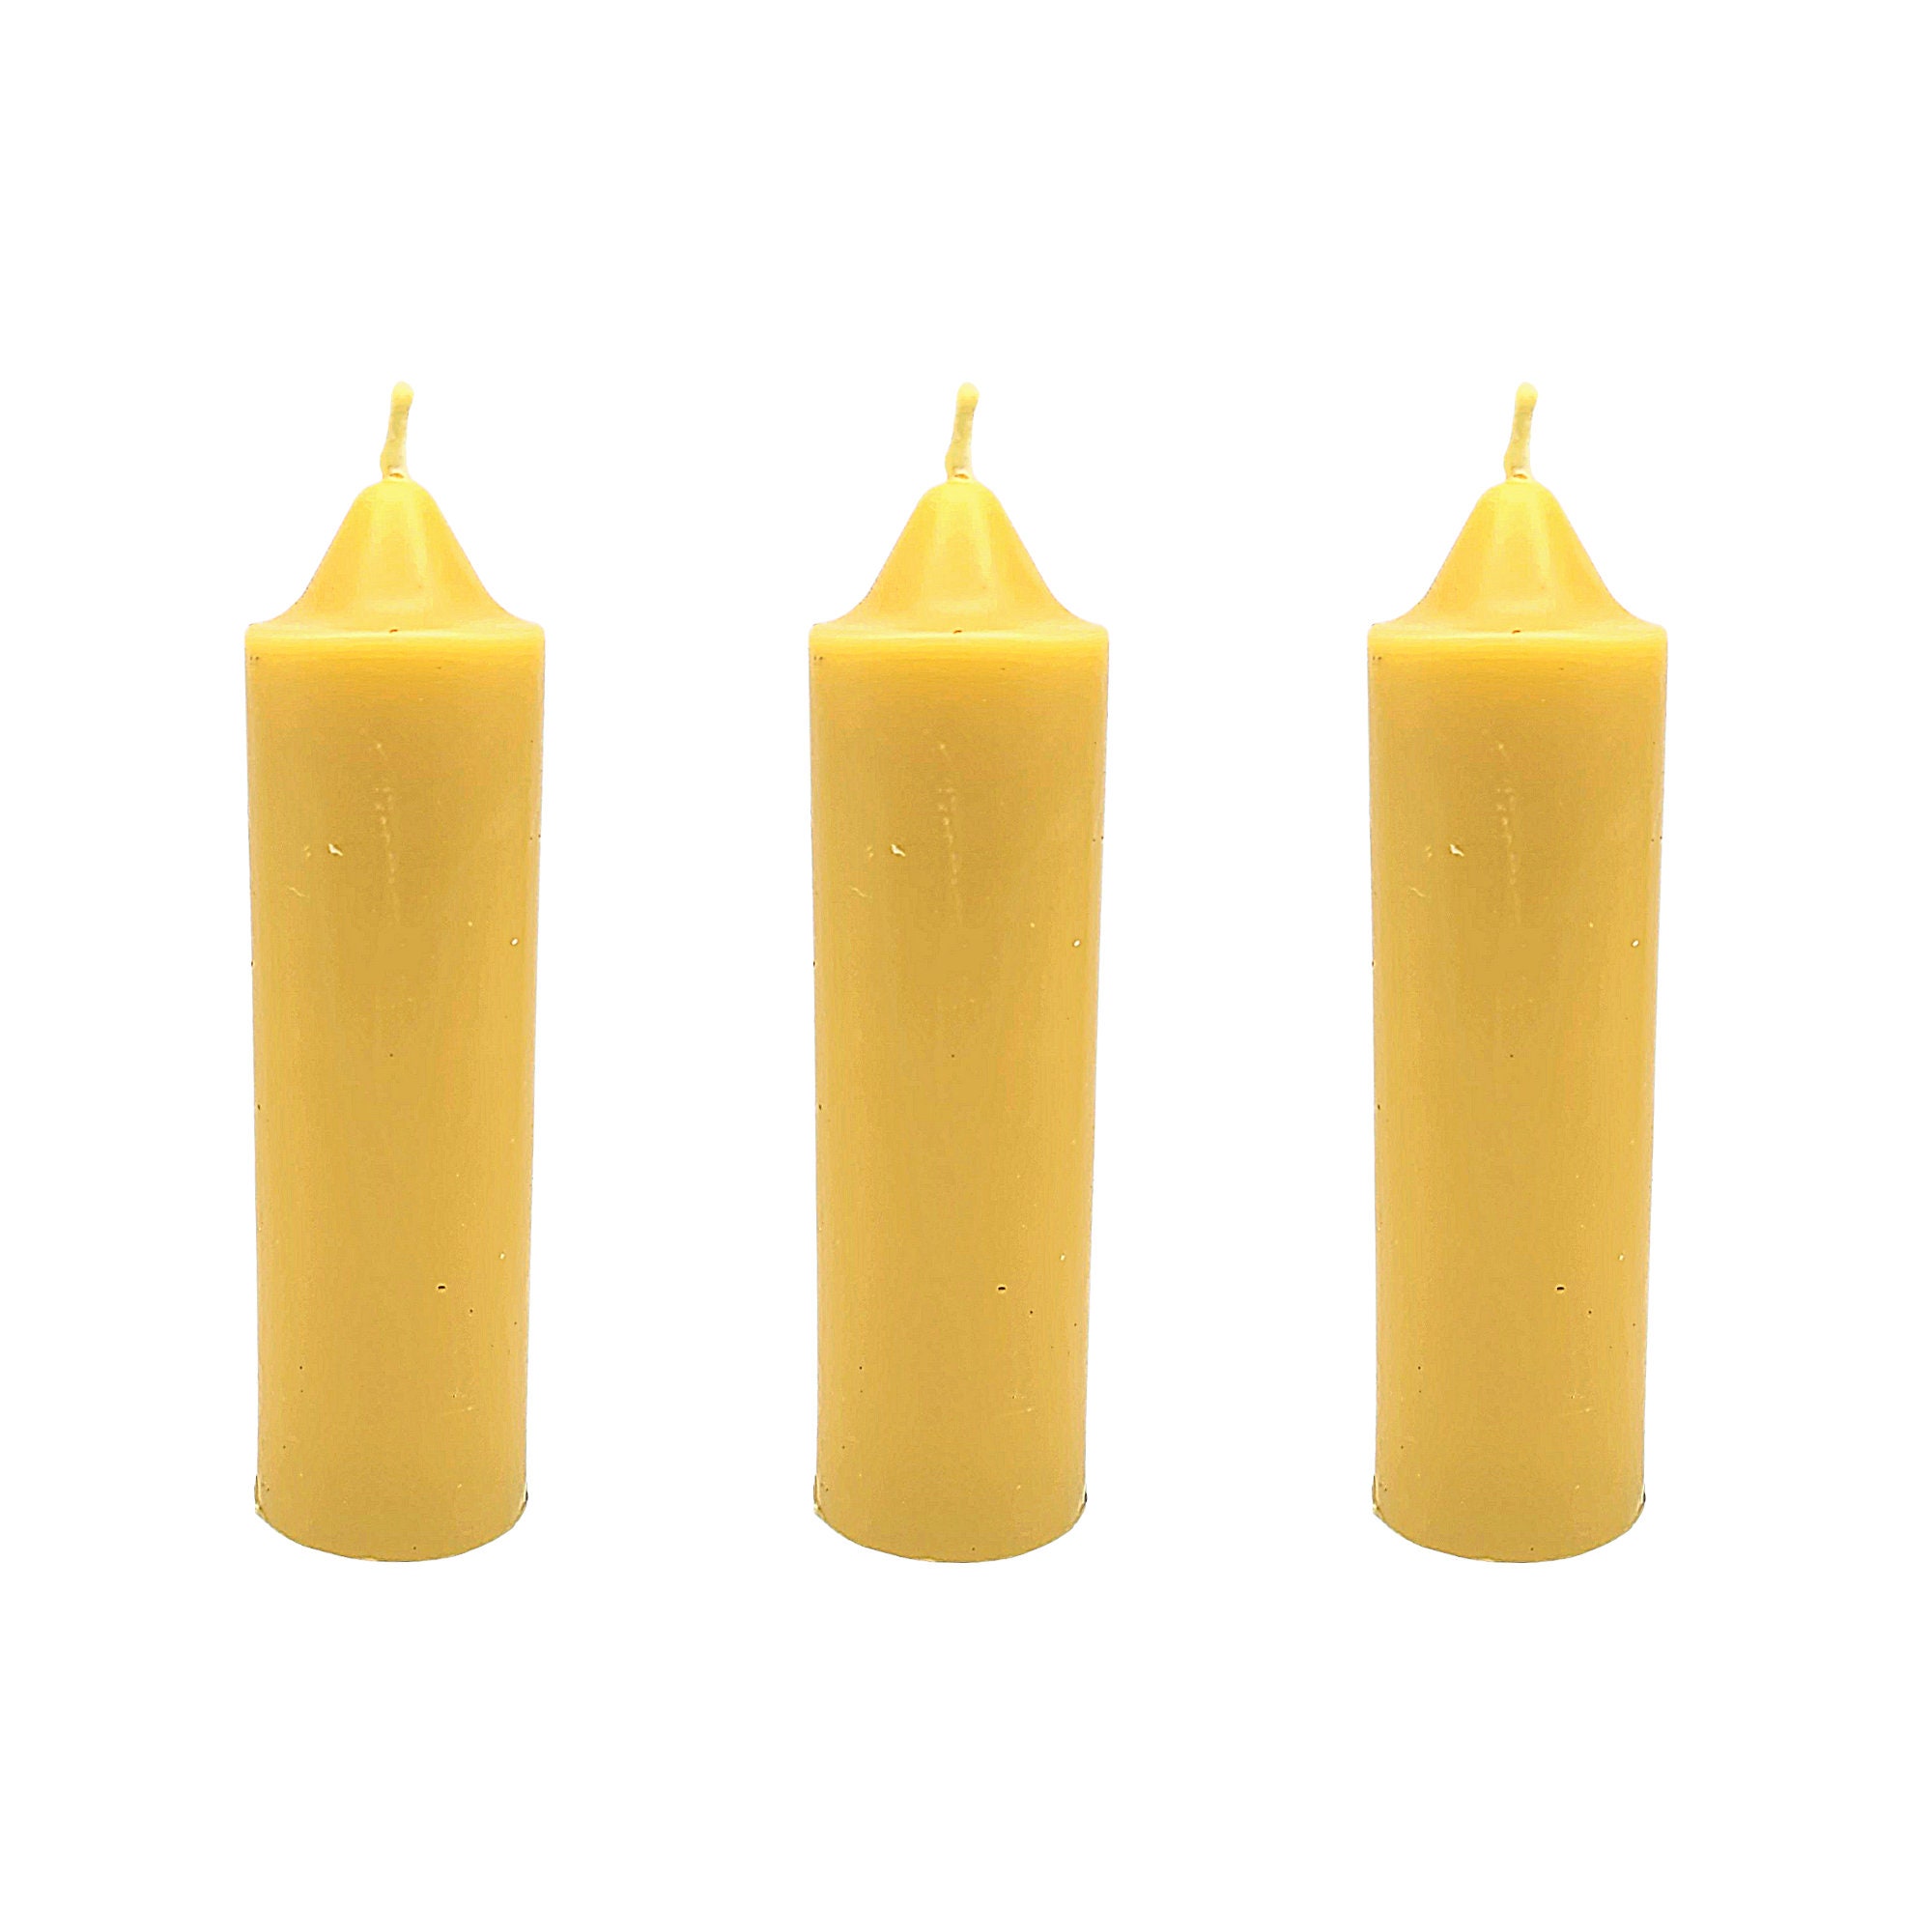 12 Emergency Candles 5hr Burn Time Each Long Lasting Candles Storm